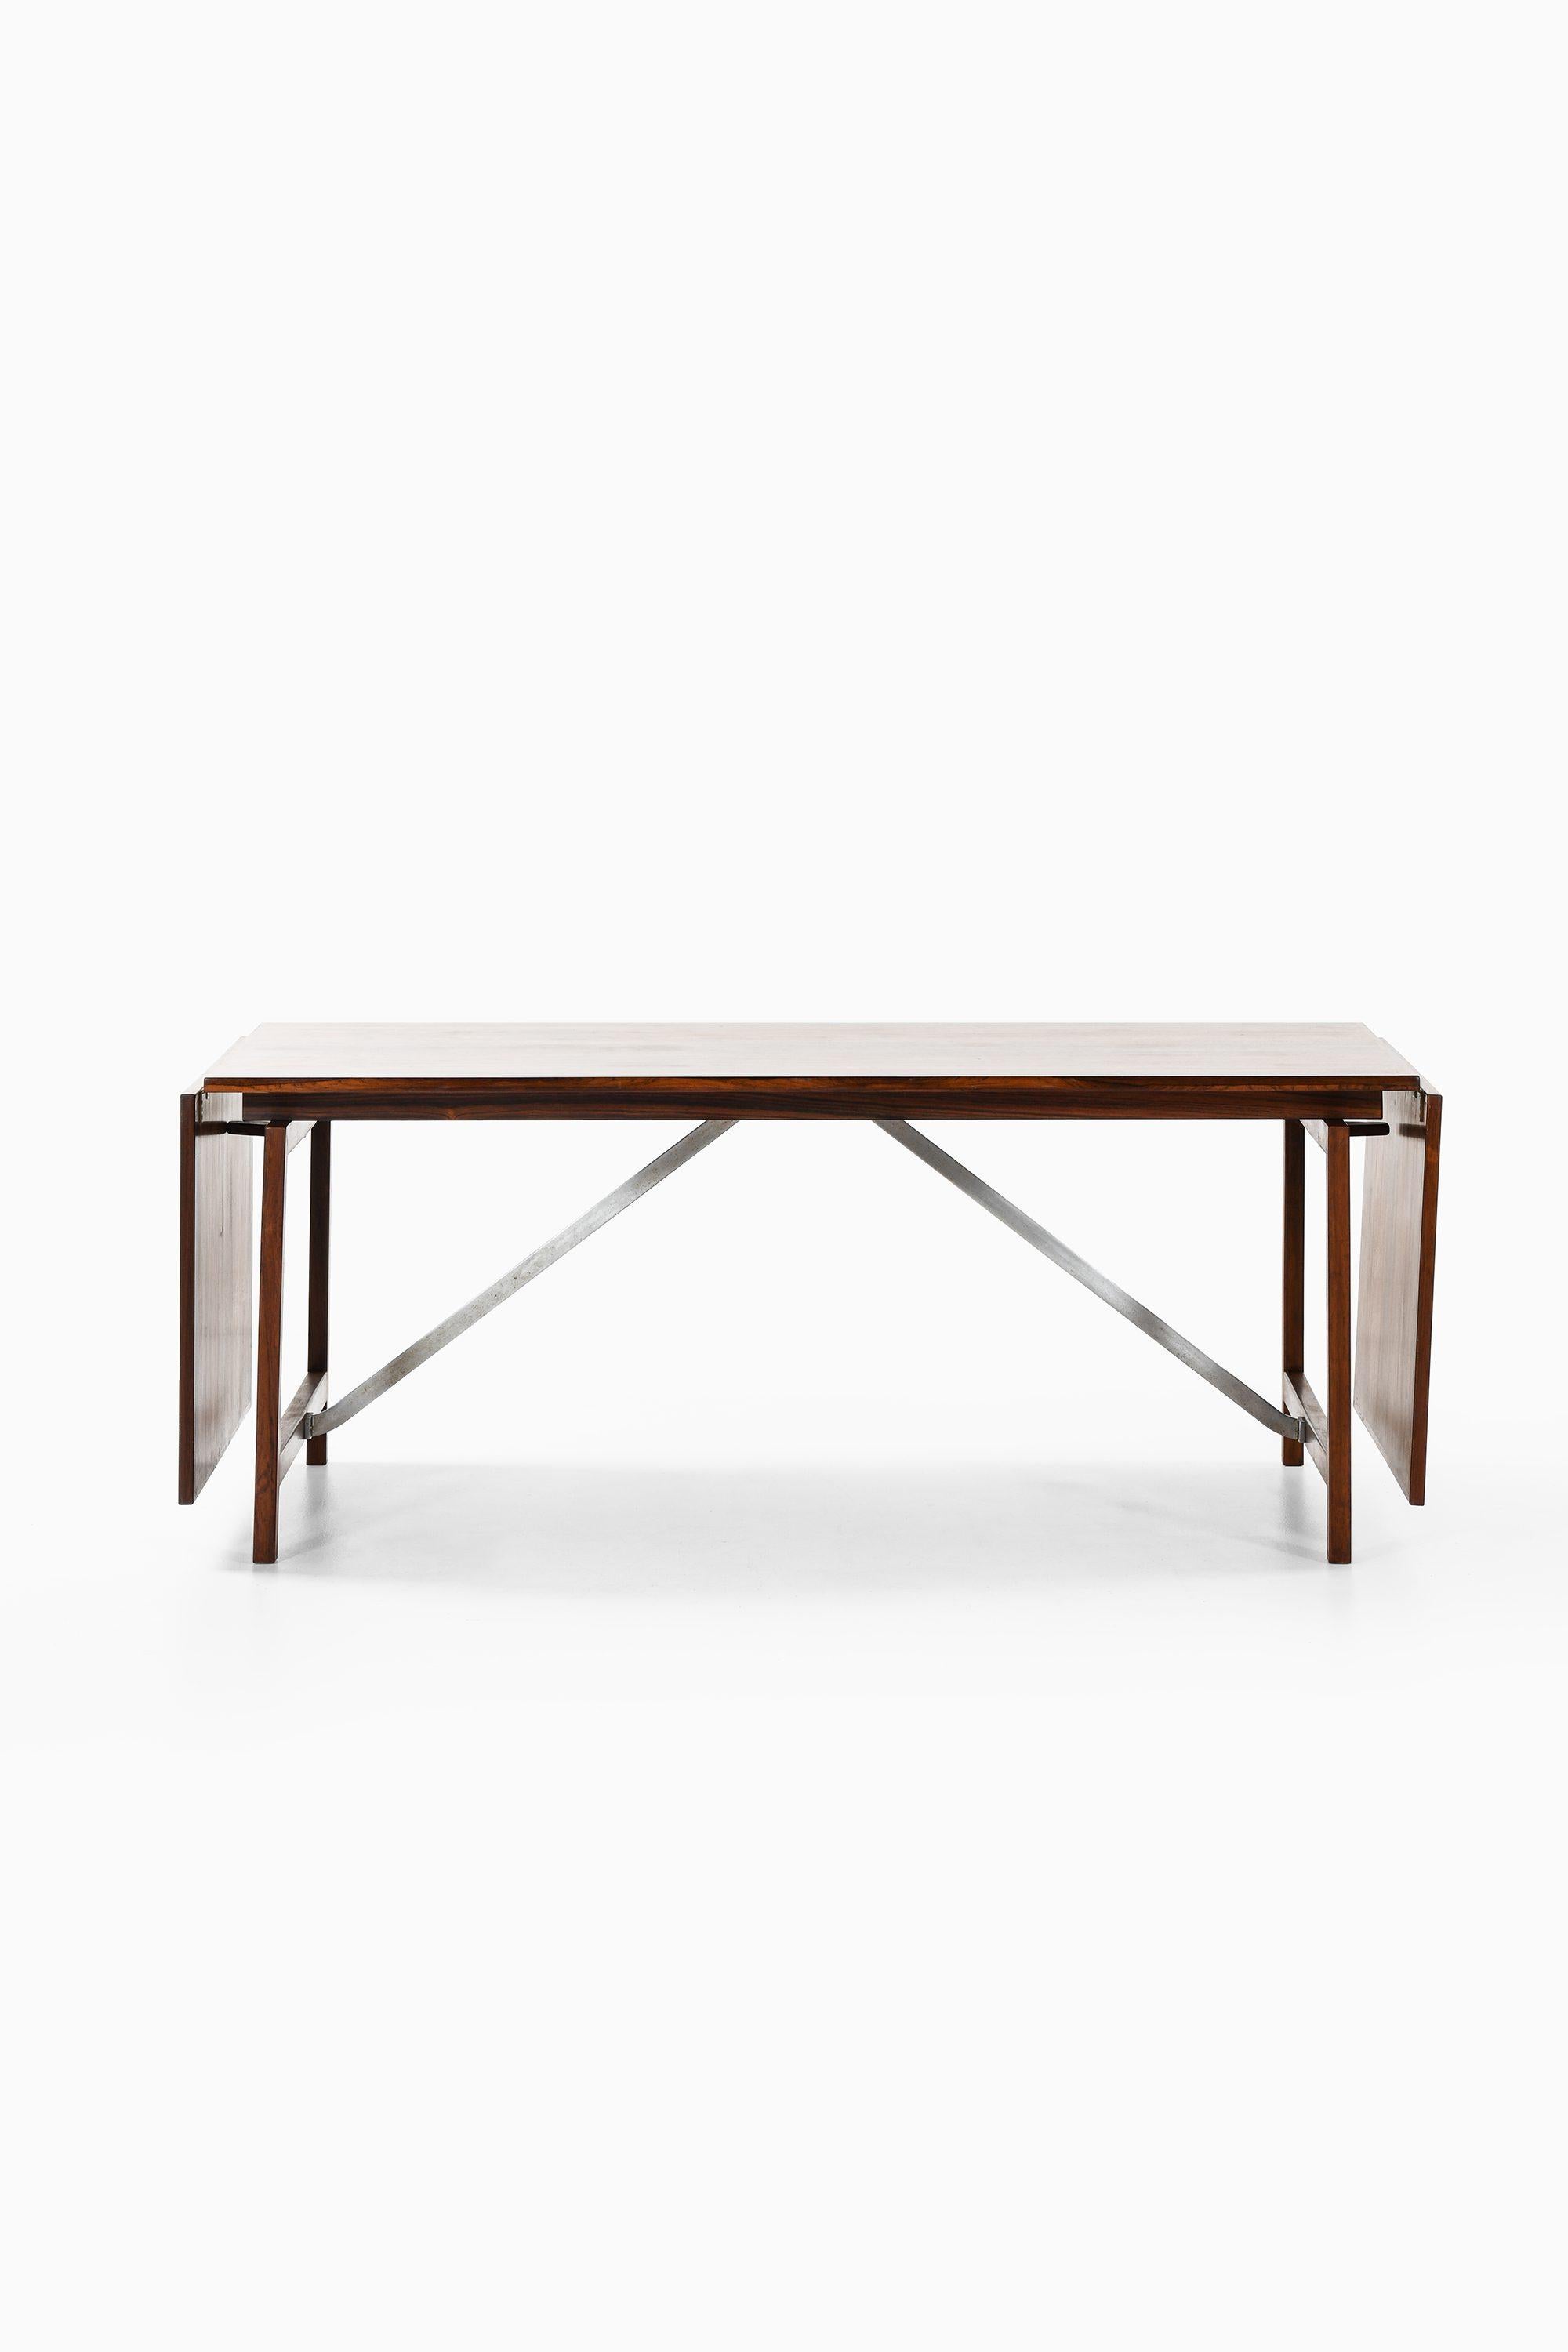 Scandinavian Modern Dining Table in Rosewood and Steel by Hans Wegner, 1960s For Sale